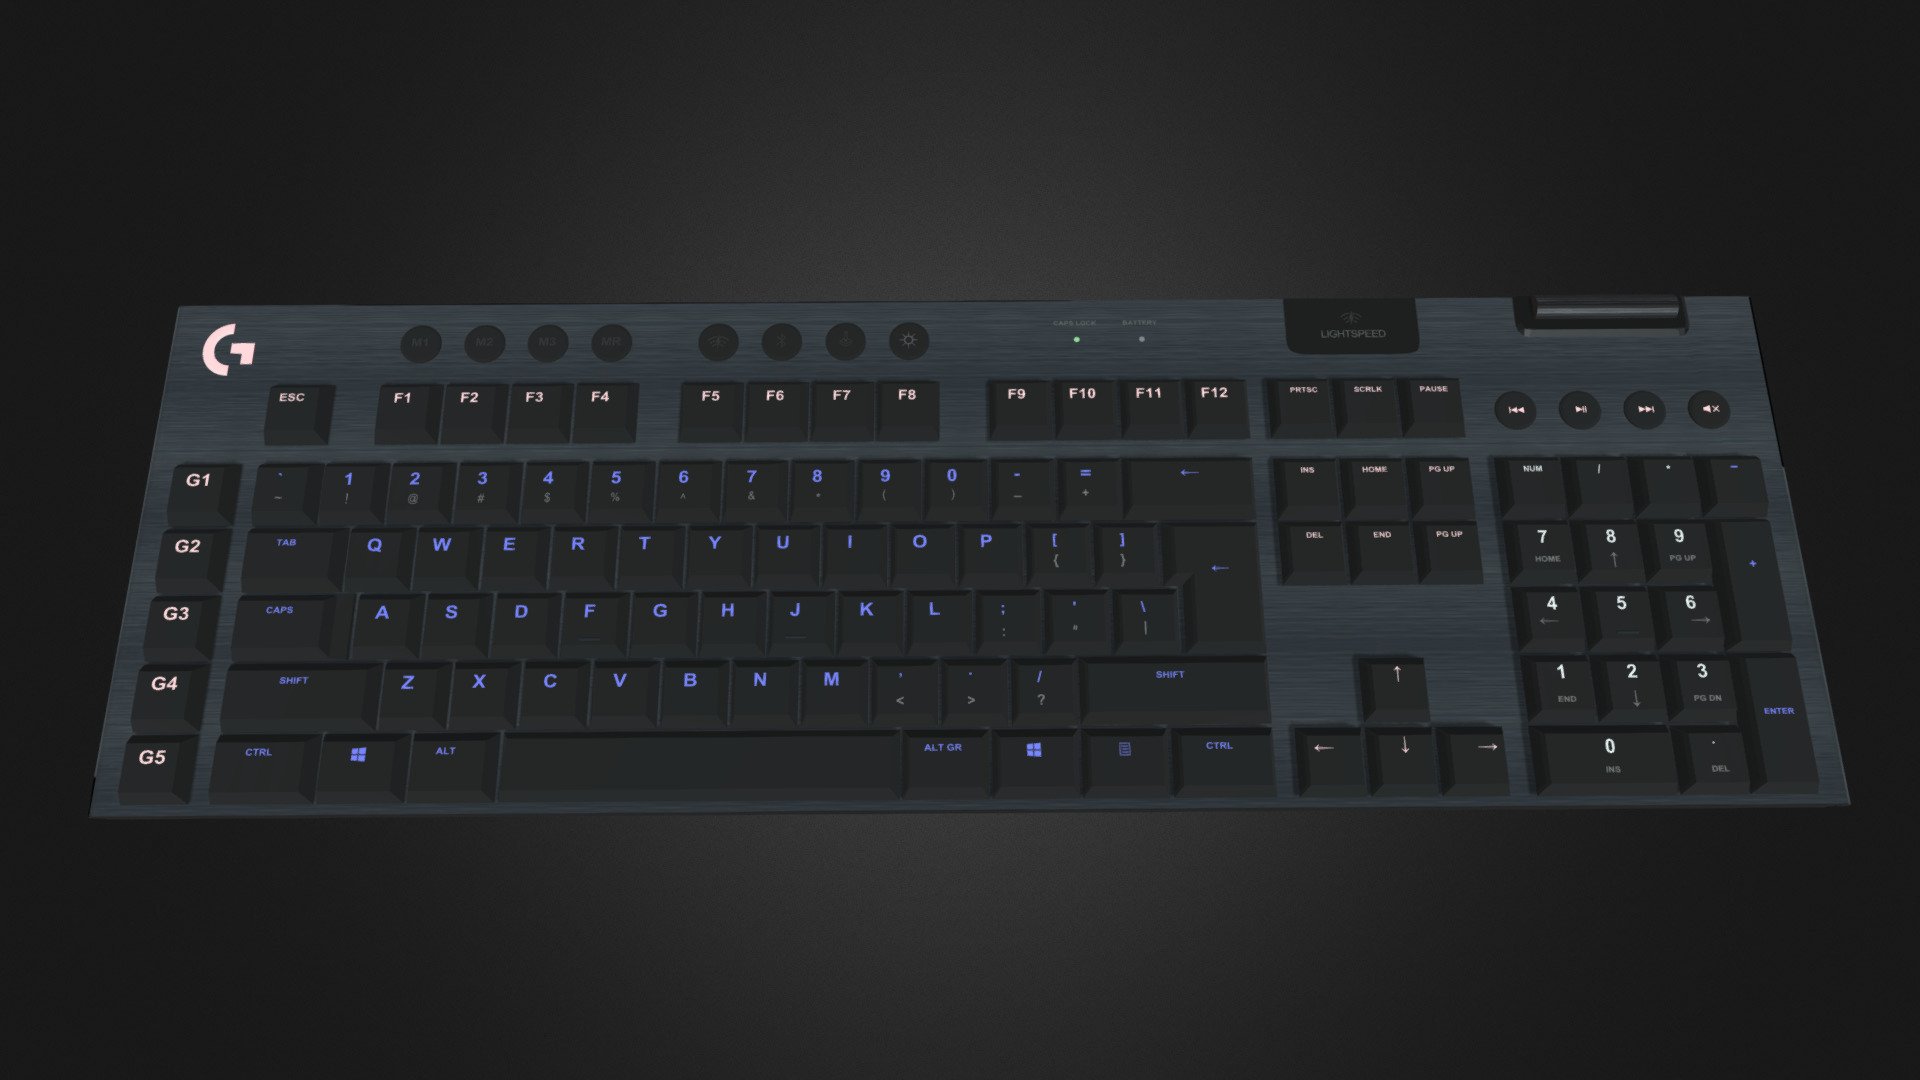 This is a high-quality 3D model of the Logitech G915 LIGHTSPEED gaming keyboard. The model accurately replicates the keyboard's low-profile, full-sized design, and features low-profile switches and keycaps. The keyboard's sleek and durable aluminum build is also faithfully recreated in this 3D model. The model also showcases the keyboard's RGB backlighting 3d model